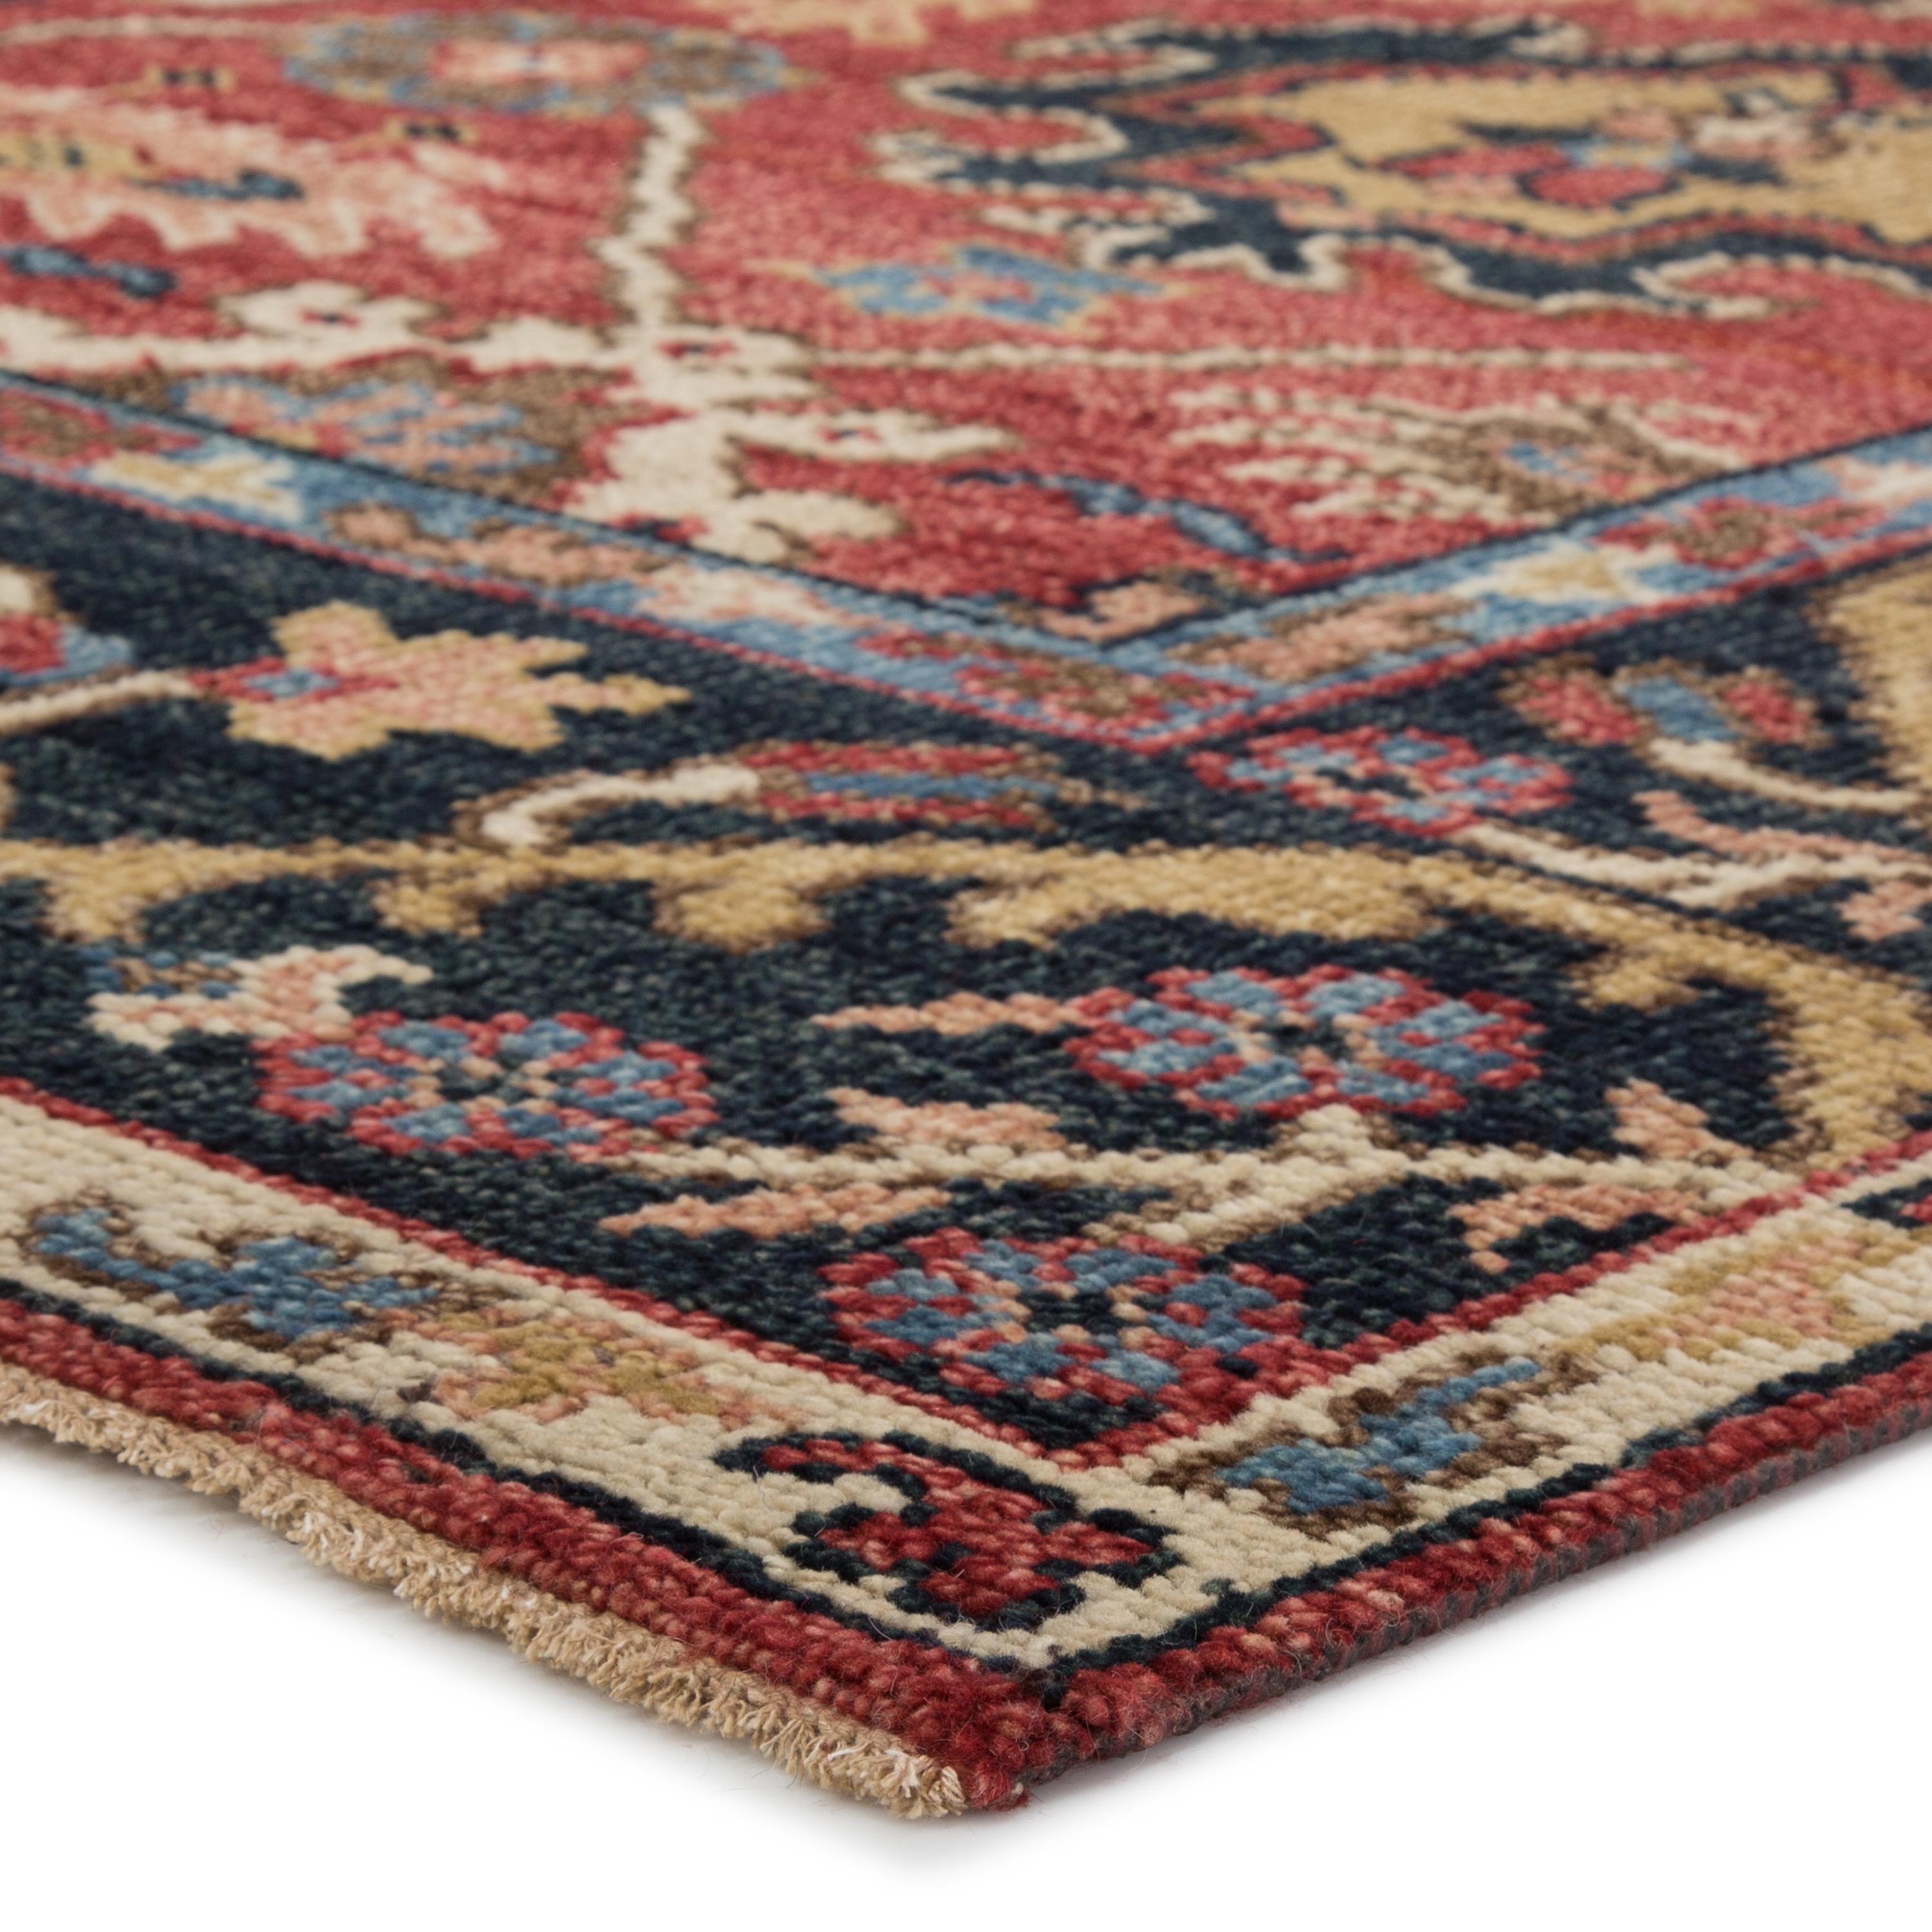 Aika Hand-Knotted Medallion Red/ Multicolor Area Rug (6'X9') - Image 1